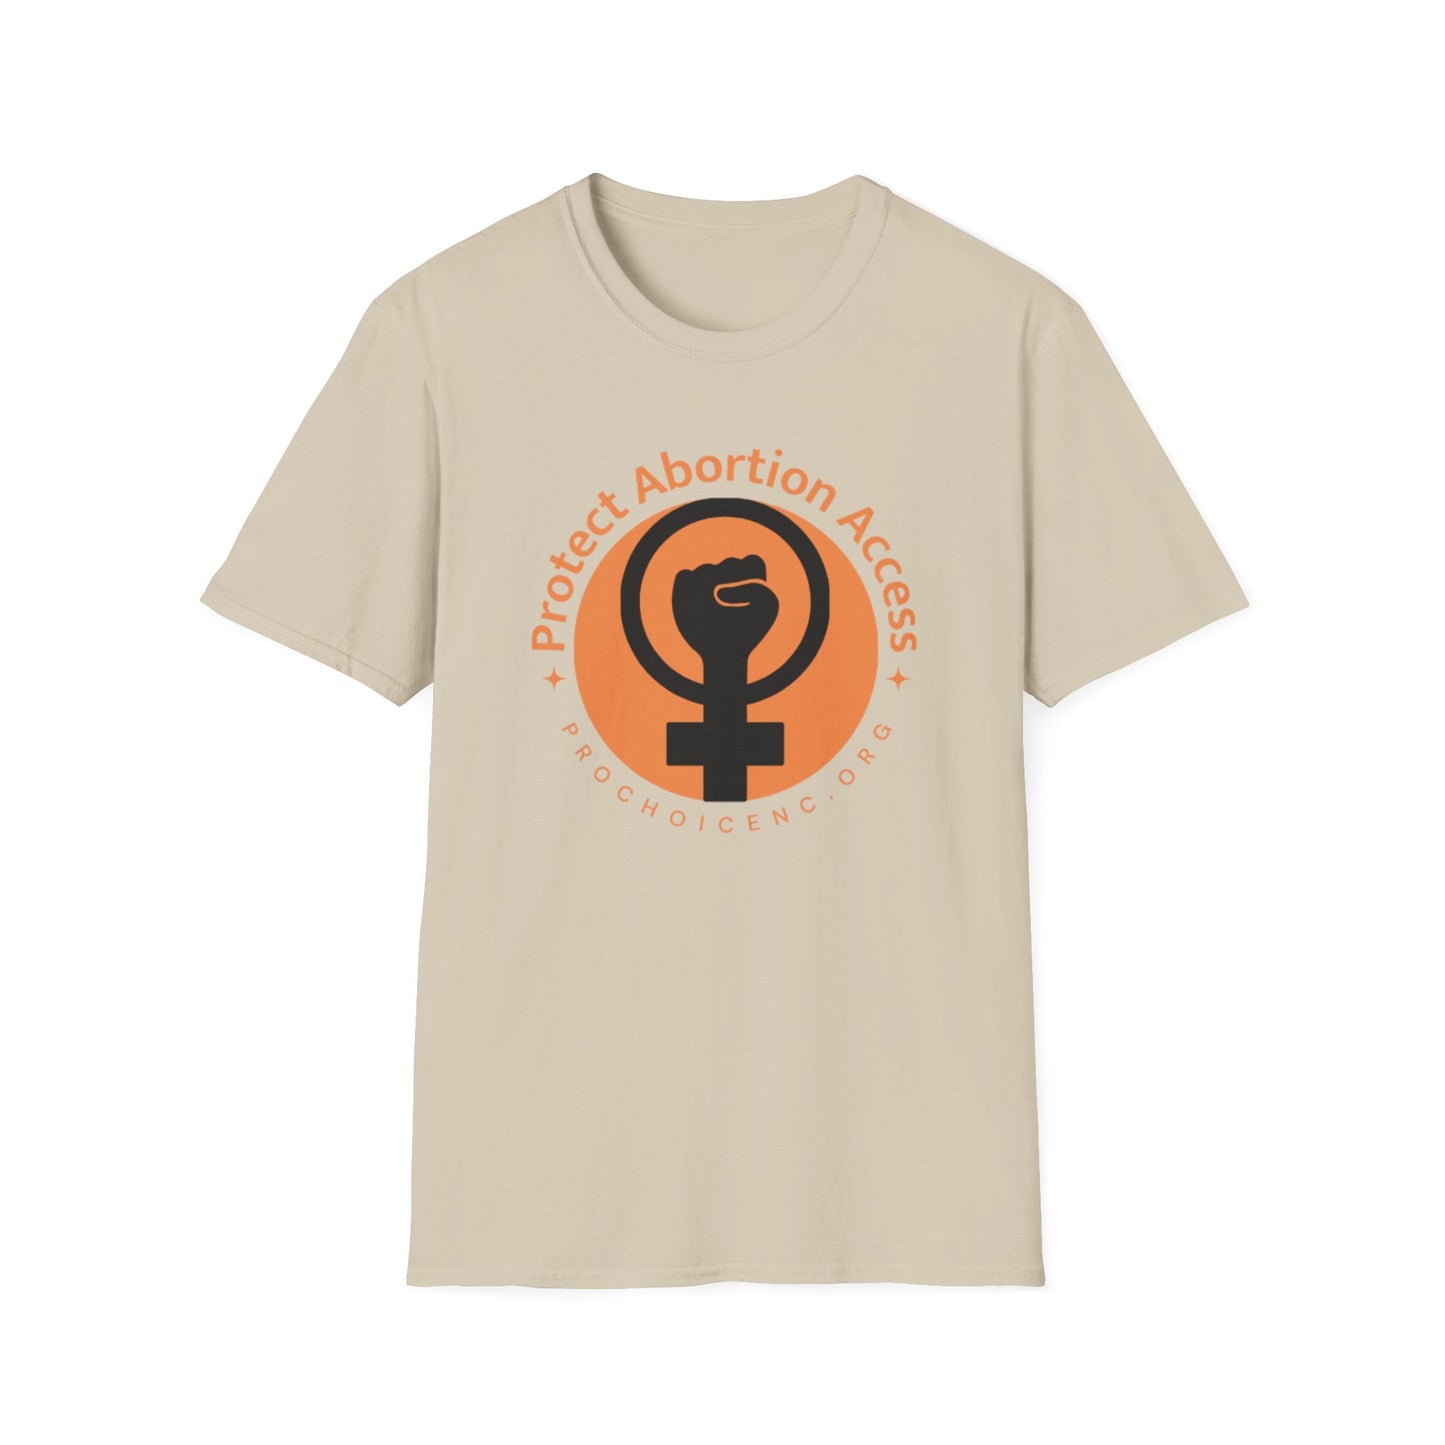 Protect Abortion Access Tee